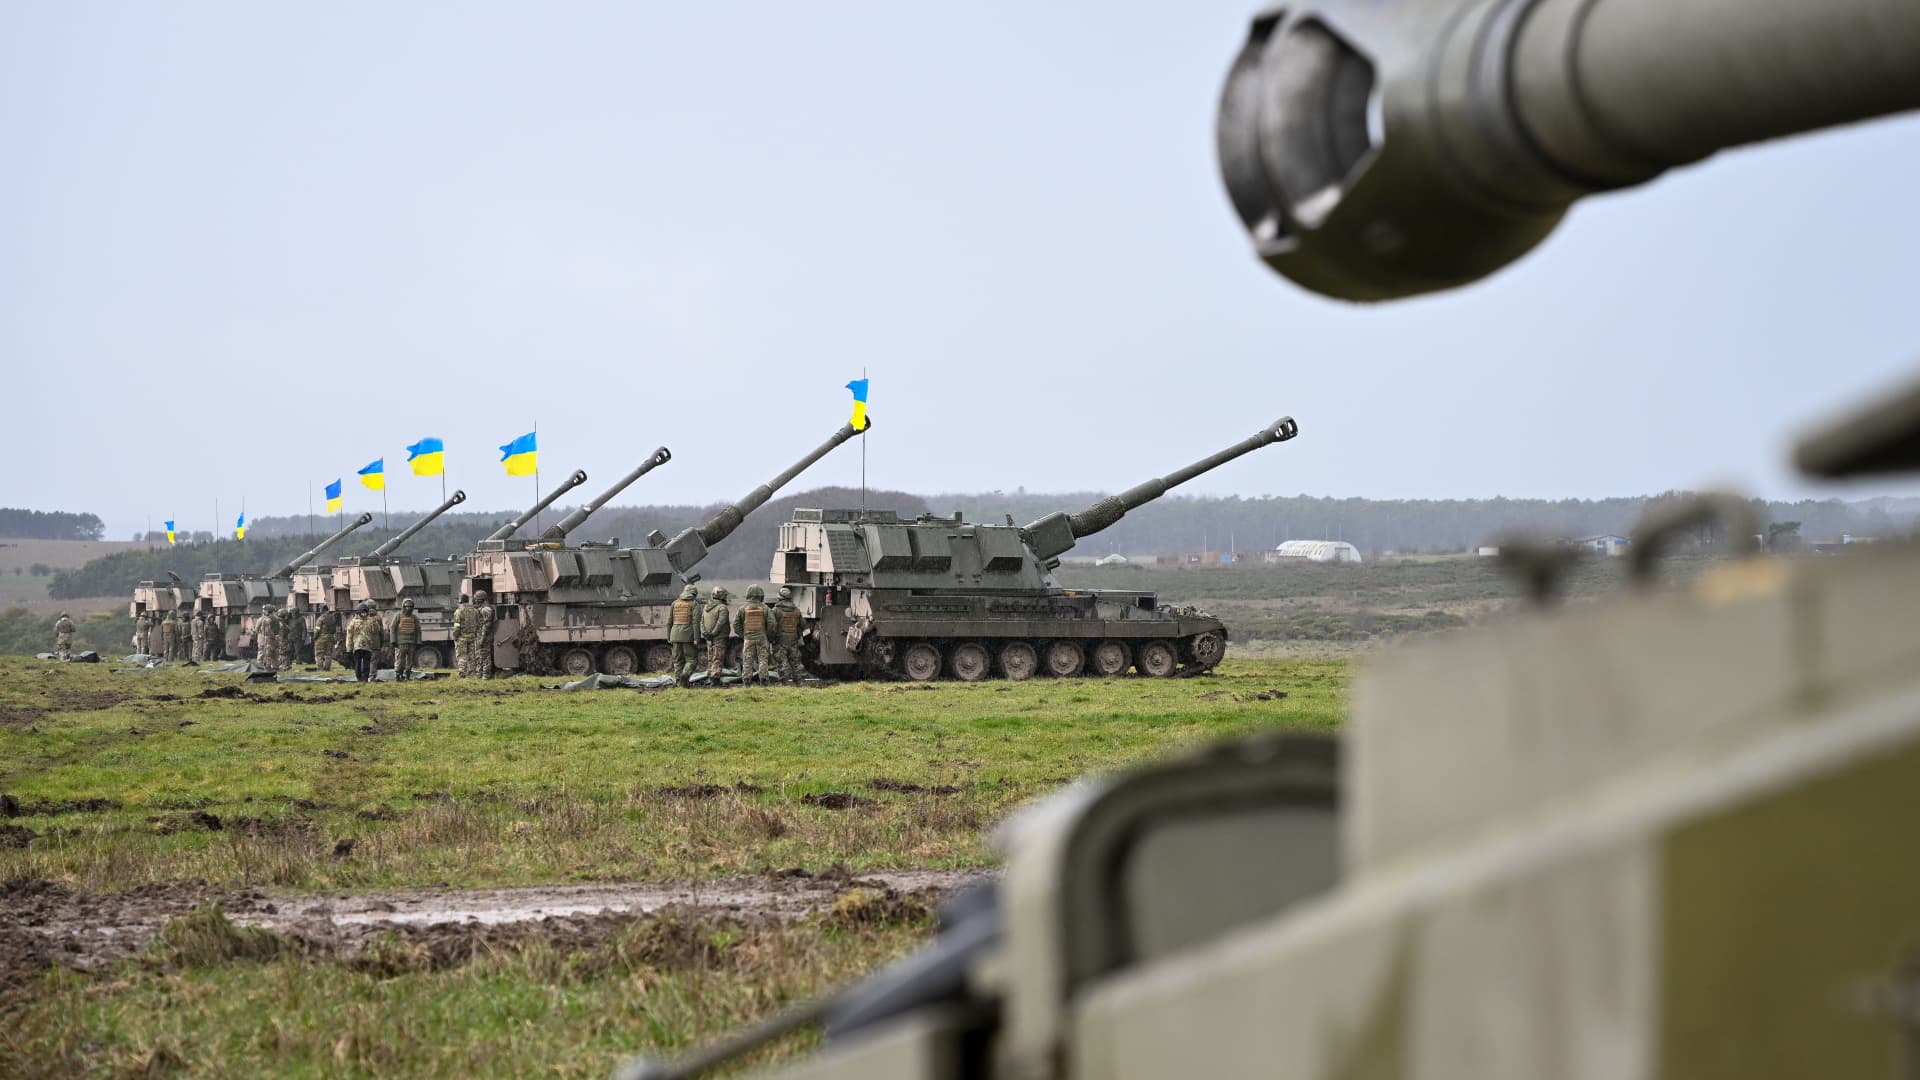 AS90 155mm self-propelled guns with Ukrainian flags are seen during final training, on March 24, 2023 in South West, England. 